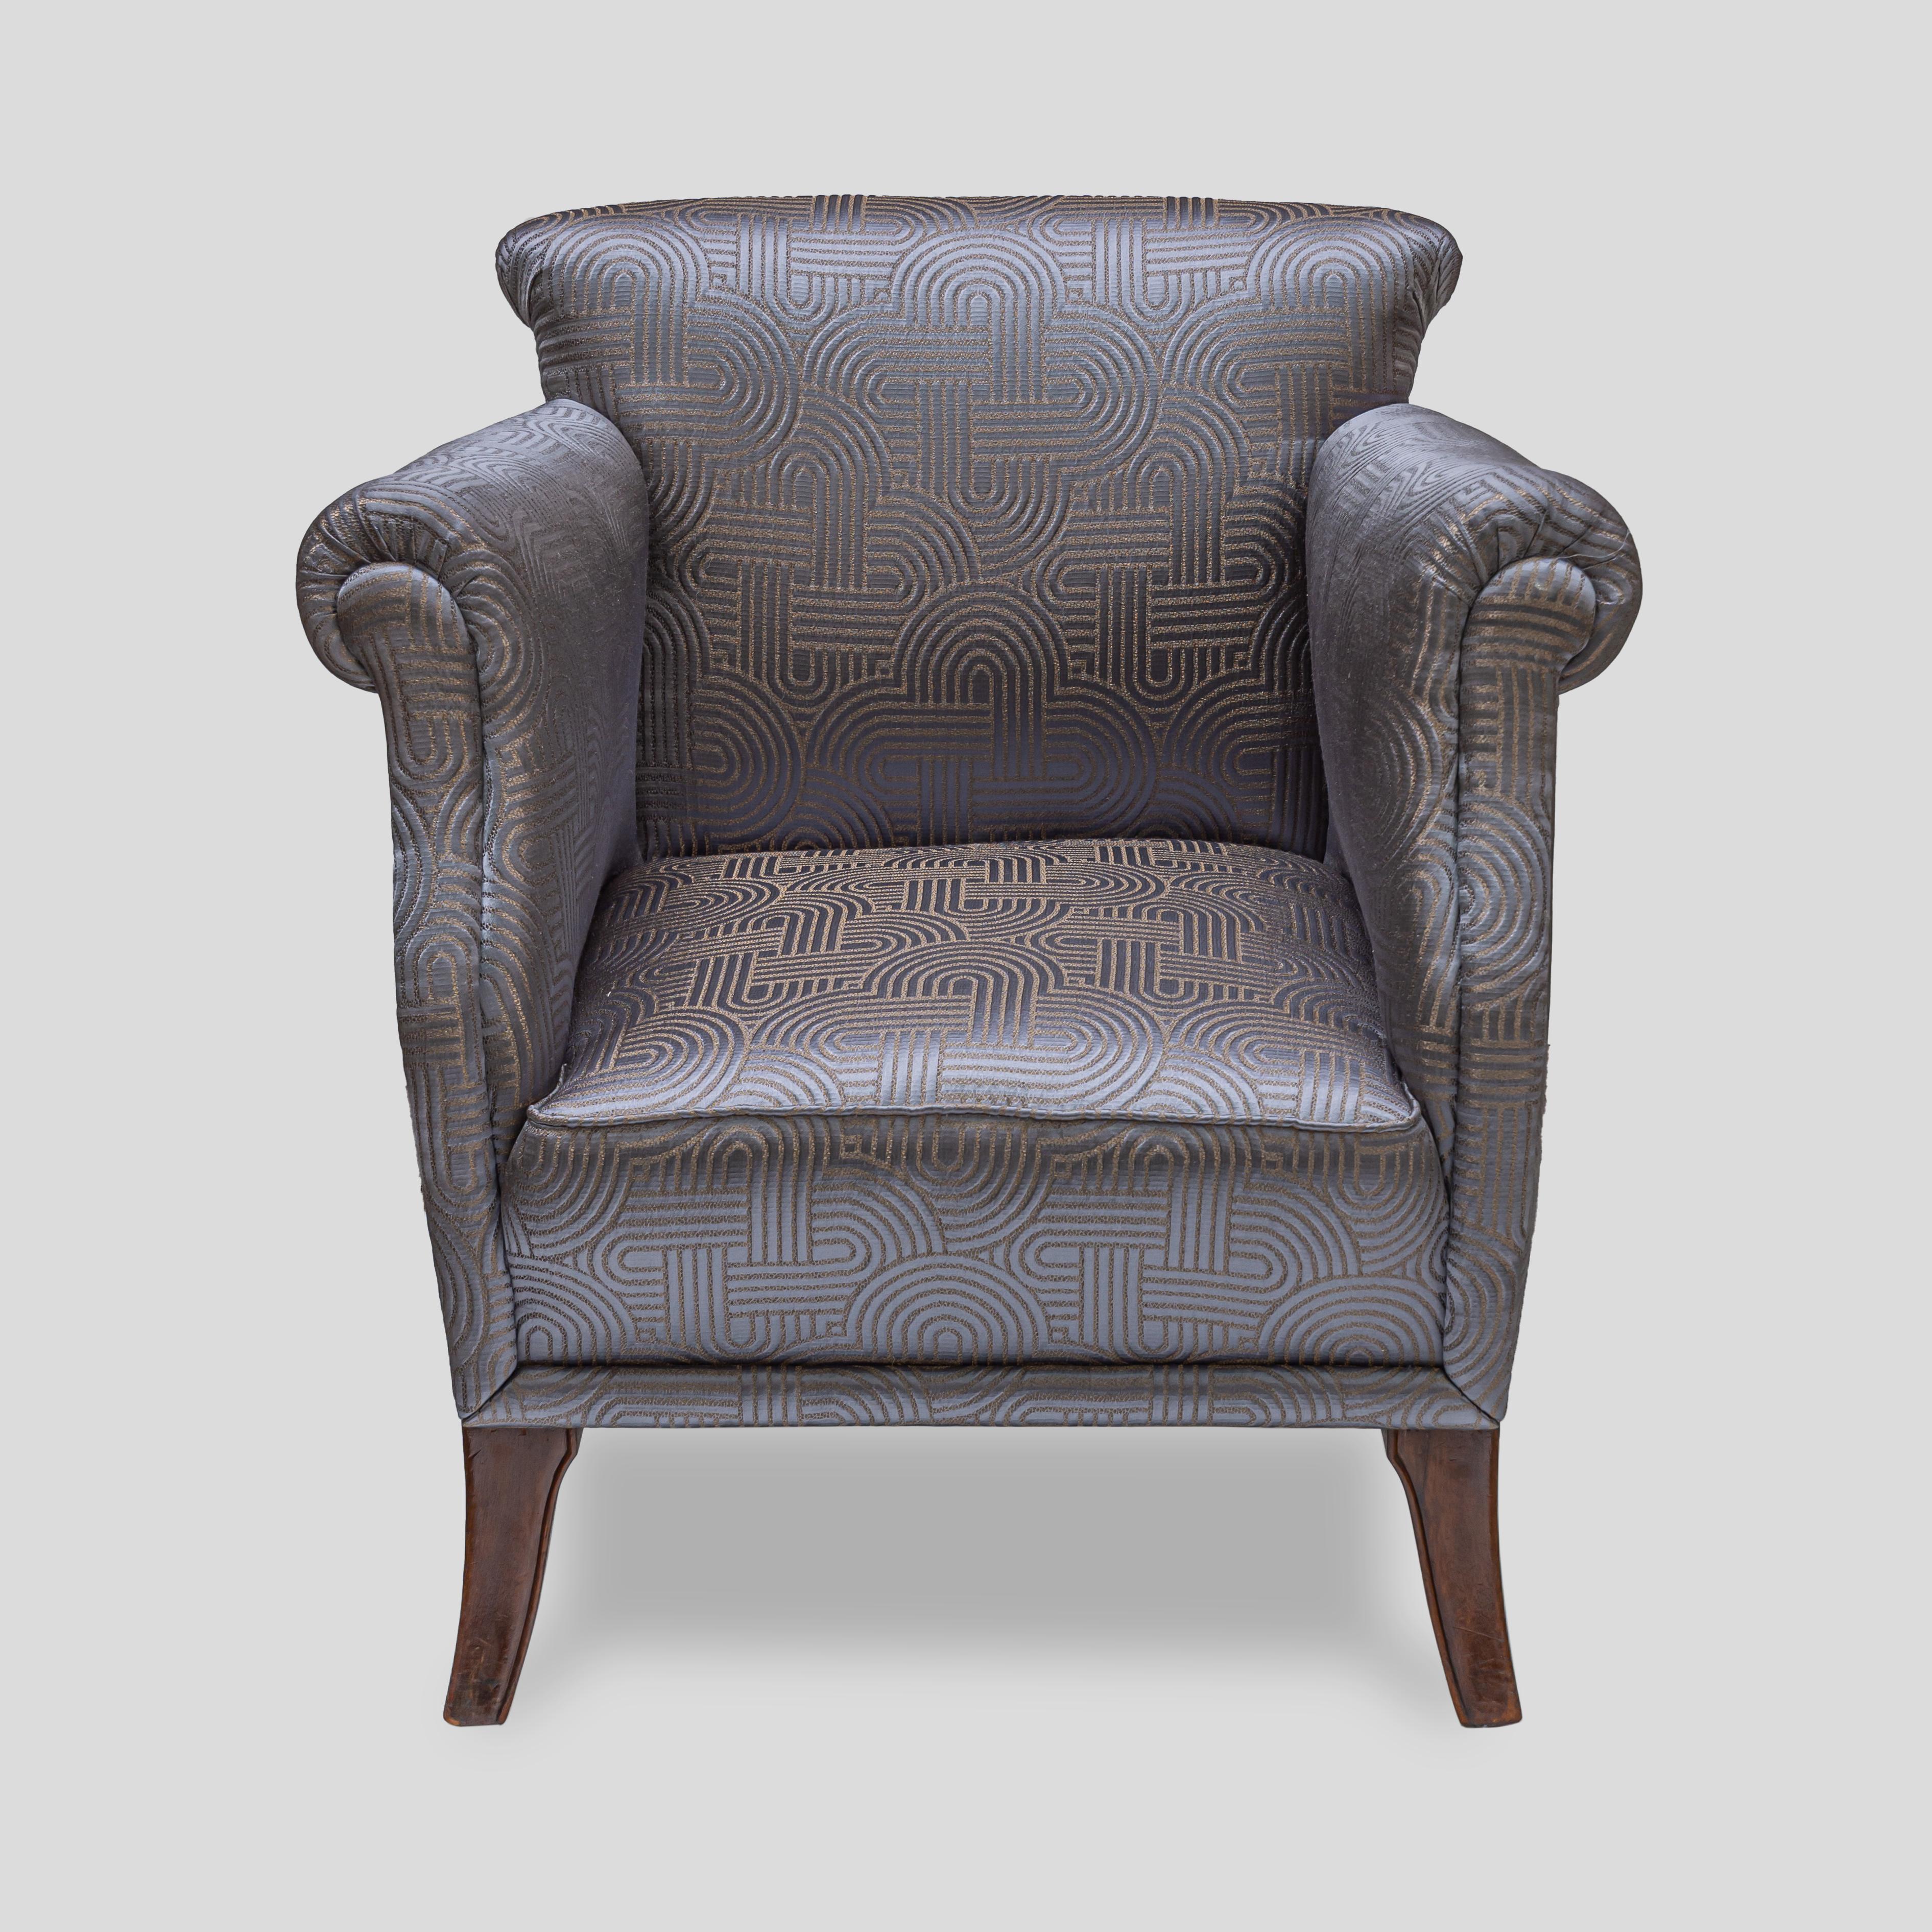 1930s Art Deco armchair, The chair has been completely re-upholstered in a comfortable and cosy light grey blue patterned satin fabric on chocolate brown wooden legs. The frame is in good condition, all the joints and backrest are original and